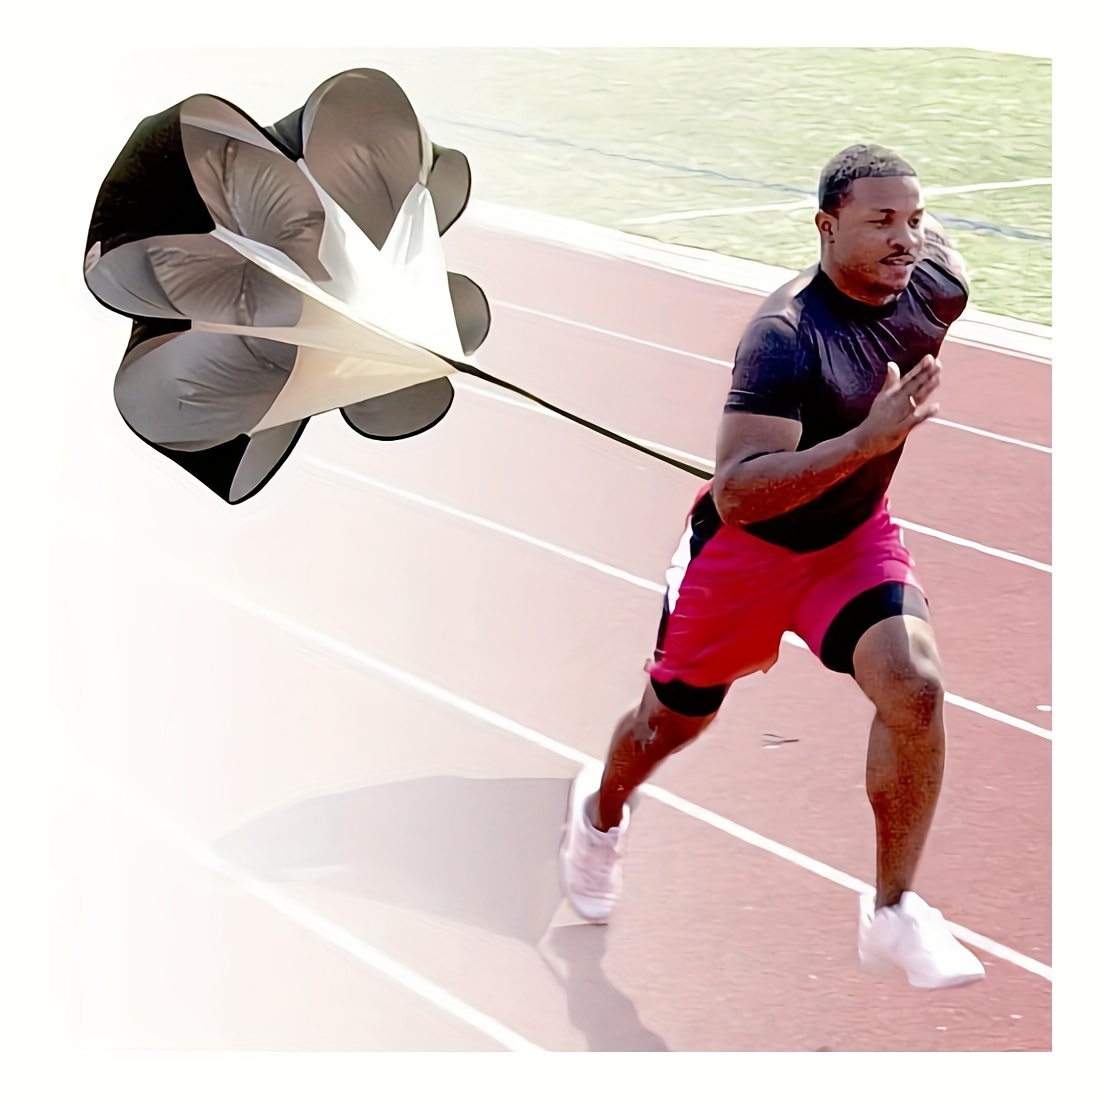 

1pc 56in/142.24cm Running Speed Resistance Parachute, Speed And Agility Exercise Tool For Soccer Football And More Sport